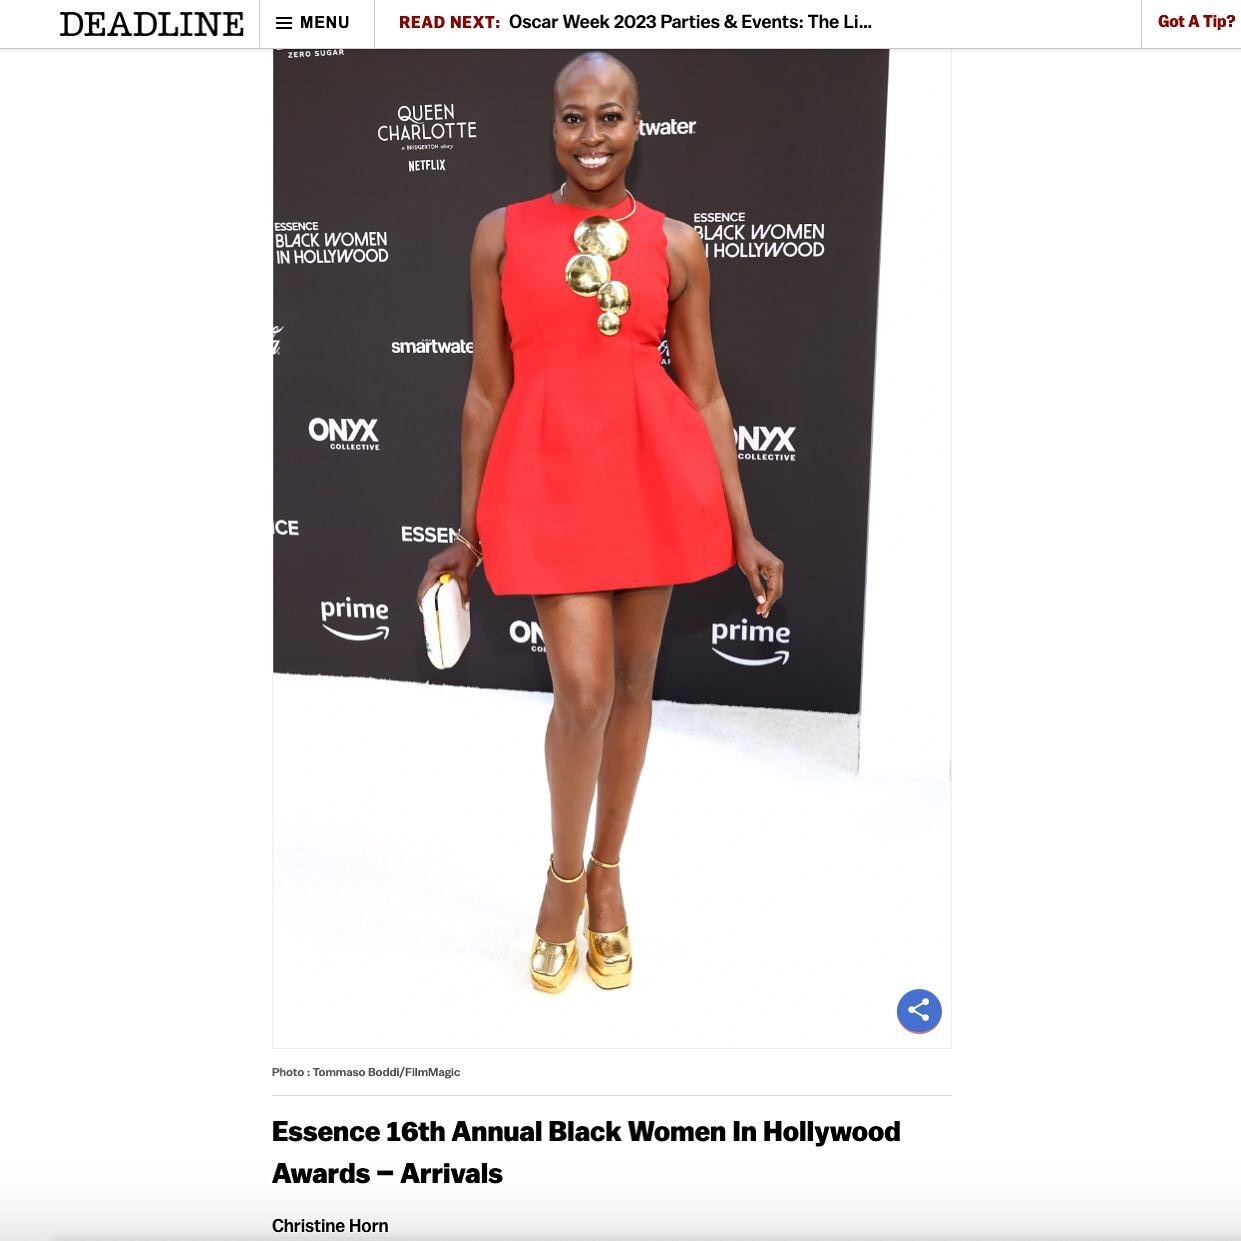 @actresschristinehorn at the Essence 16th Annual Black Women in Hollywood Awards event @essence